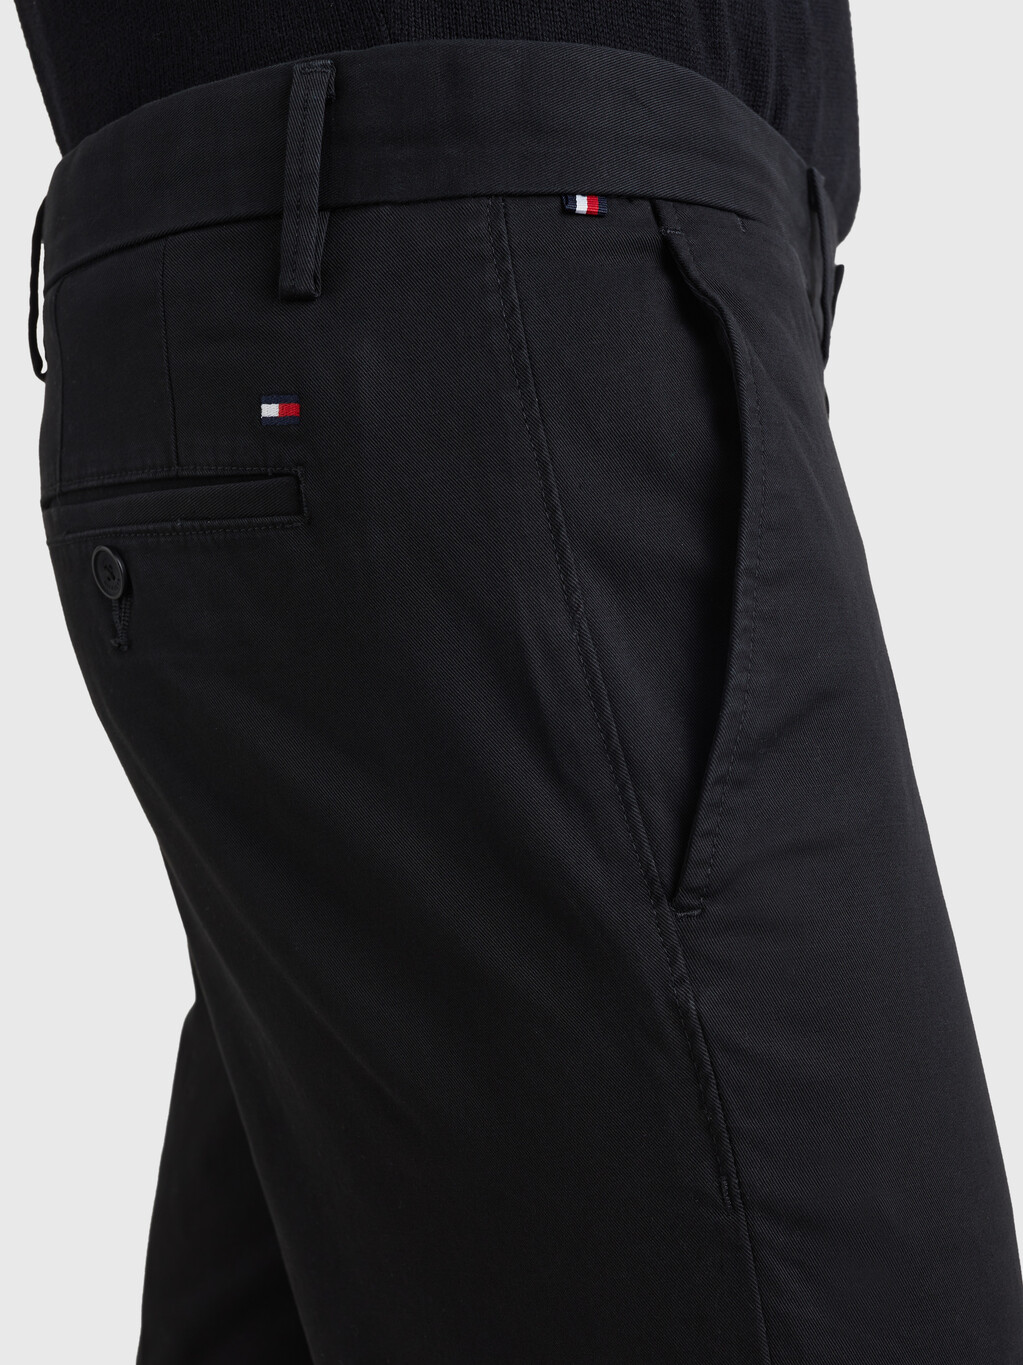 1985 Collection Denton Fitted Chinos, Black, hi-res